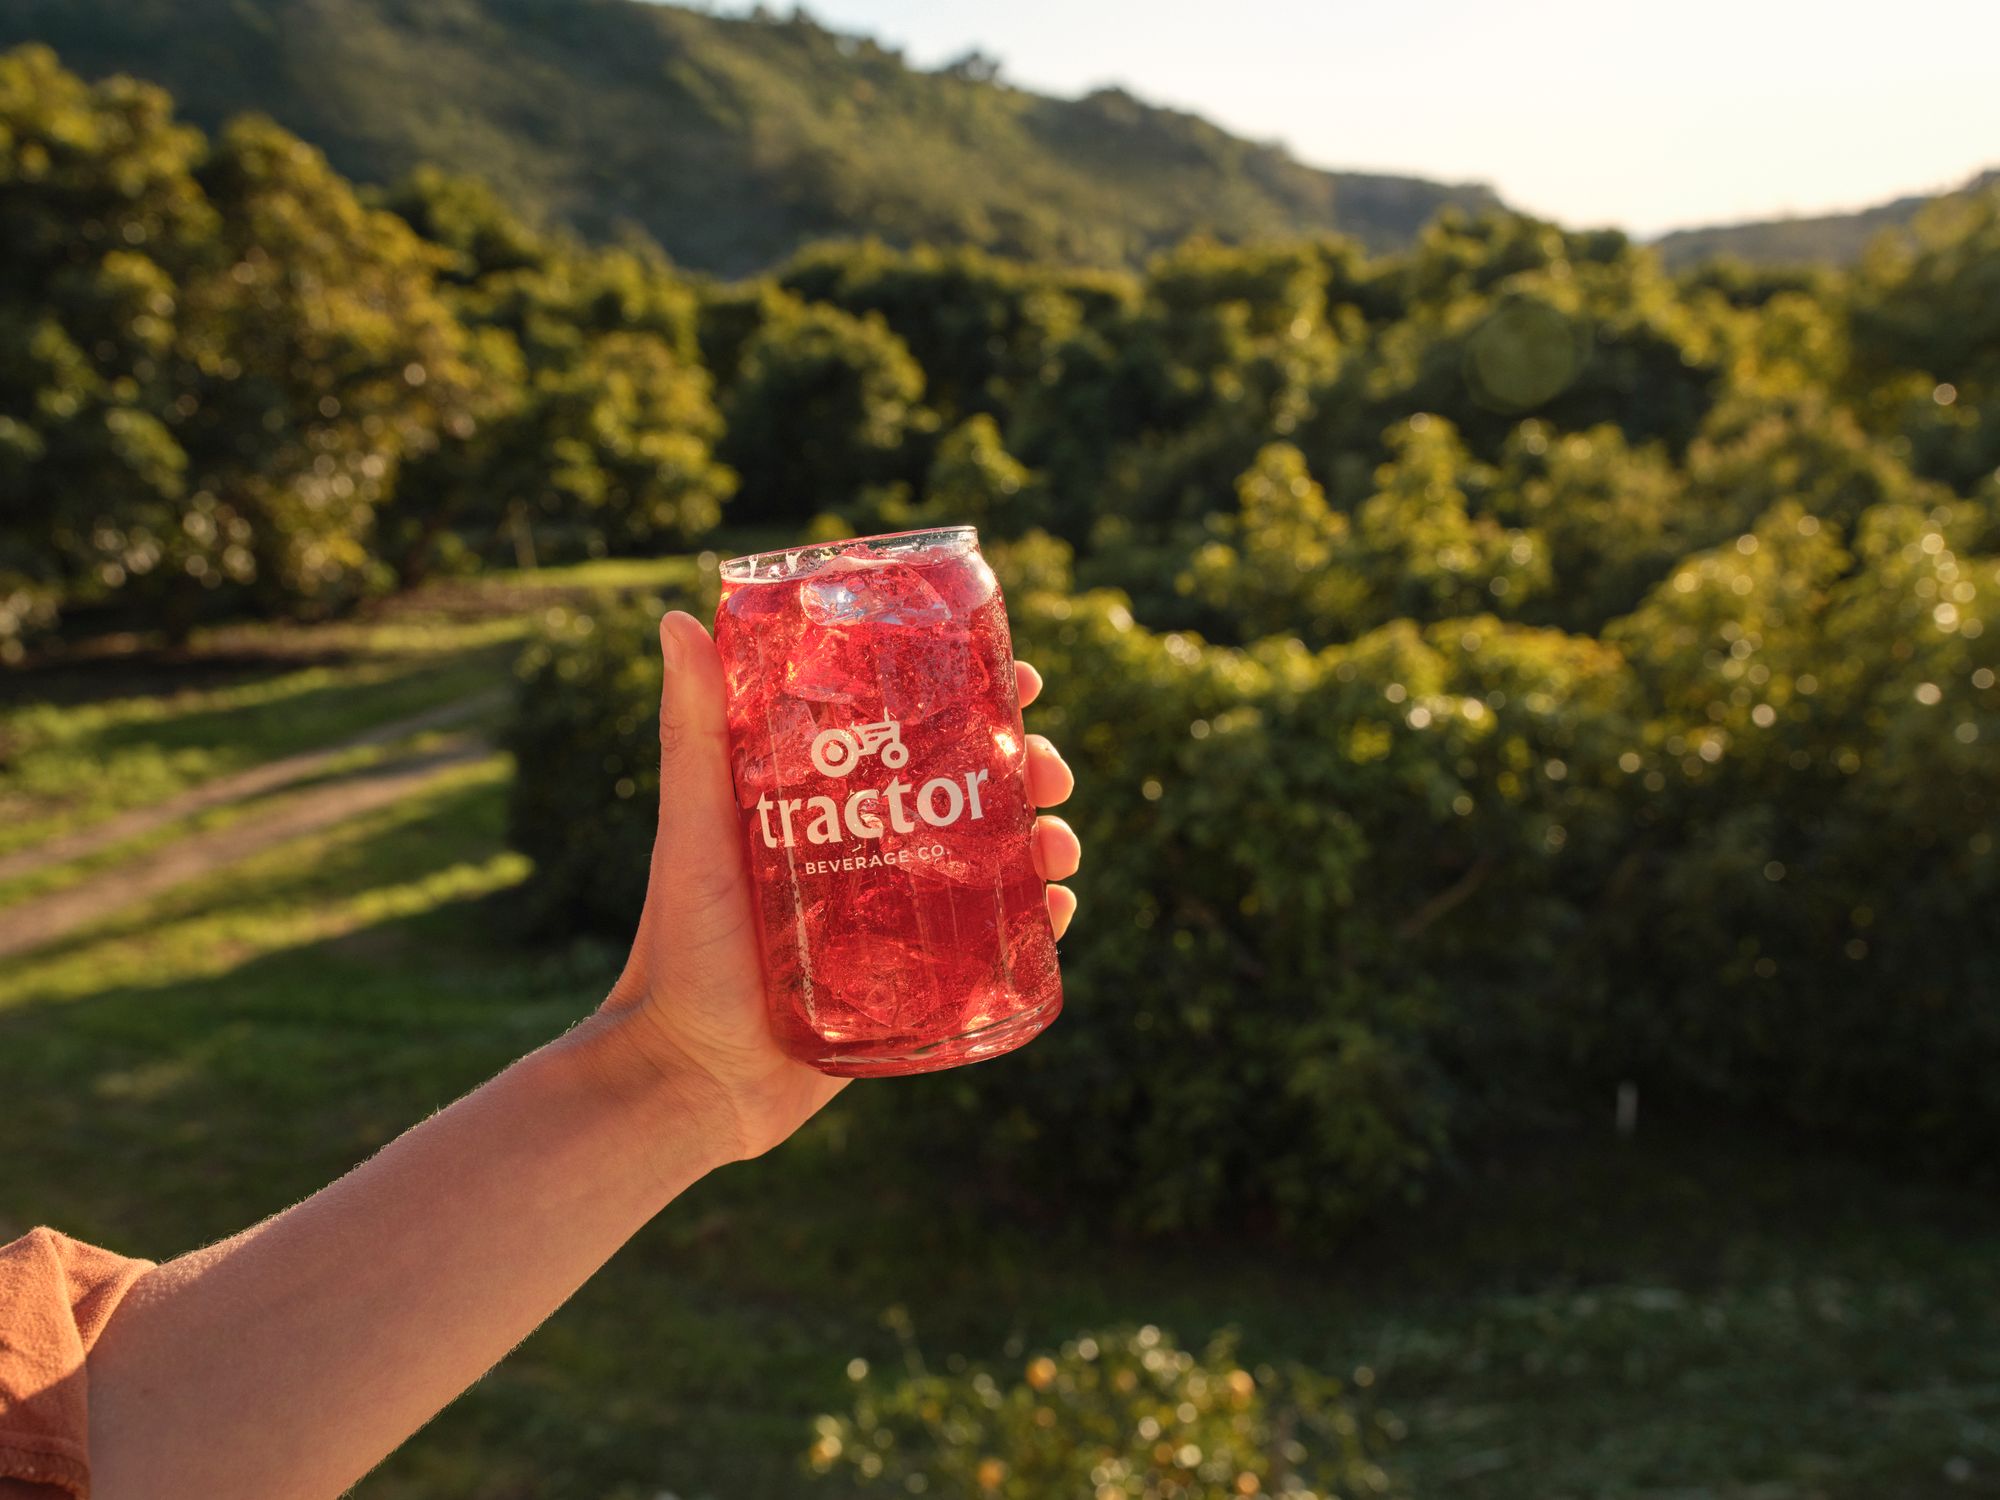 Person holdng a glass of a red beverage from Tractor Beverage co., with a scenic backdrop of trees and hills